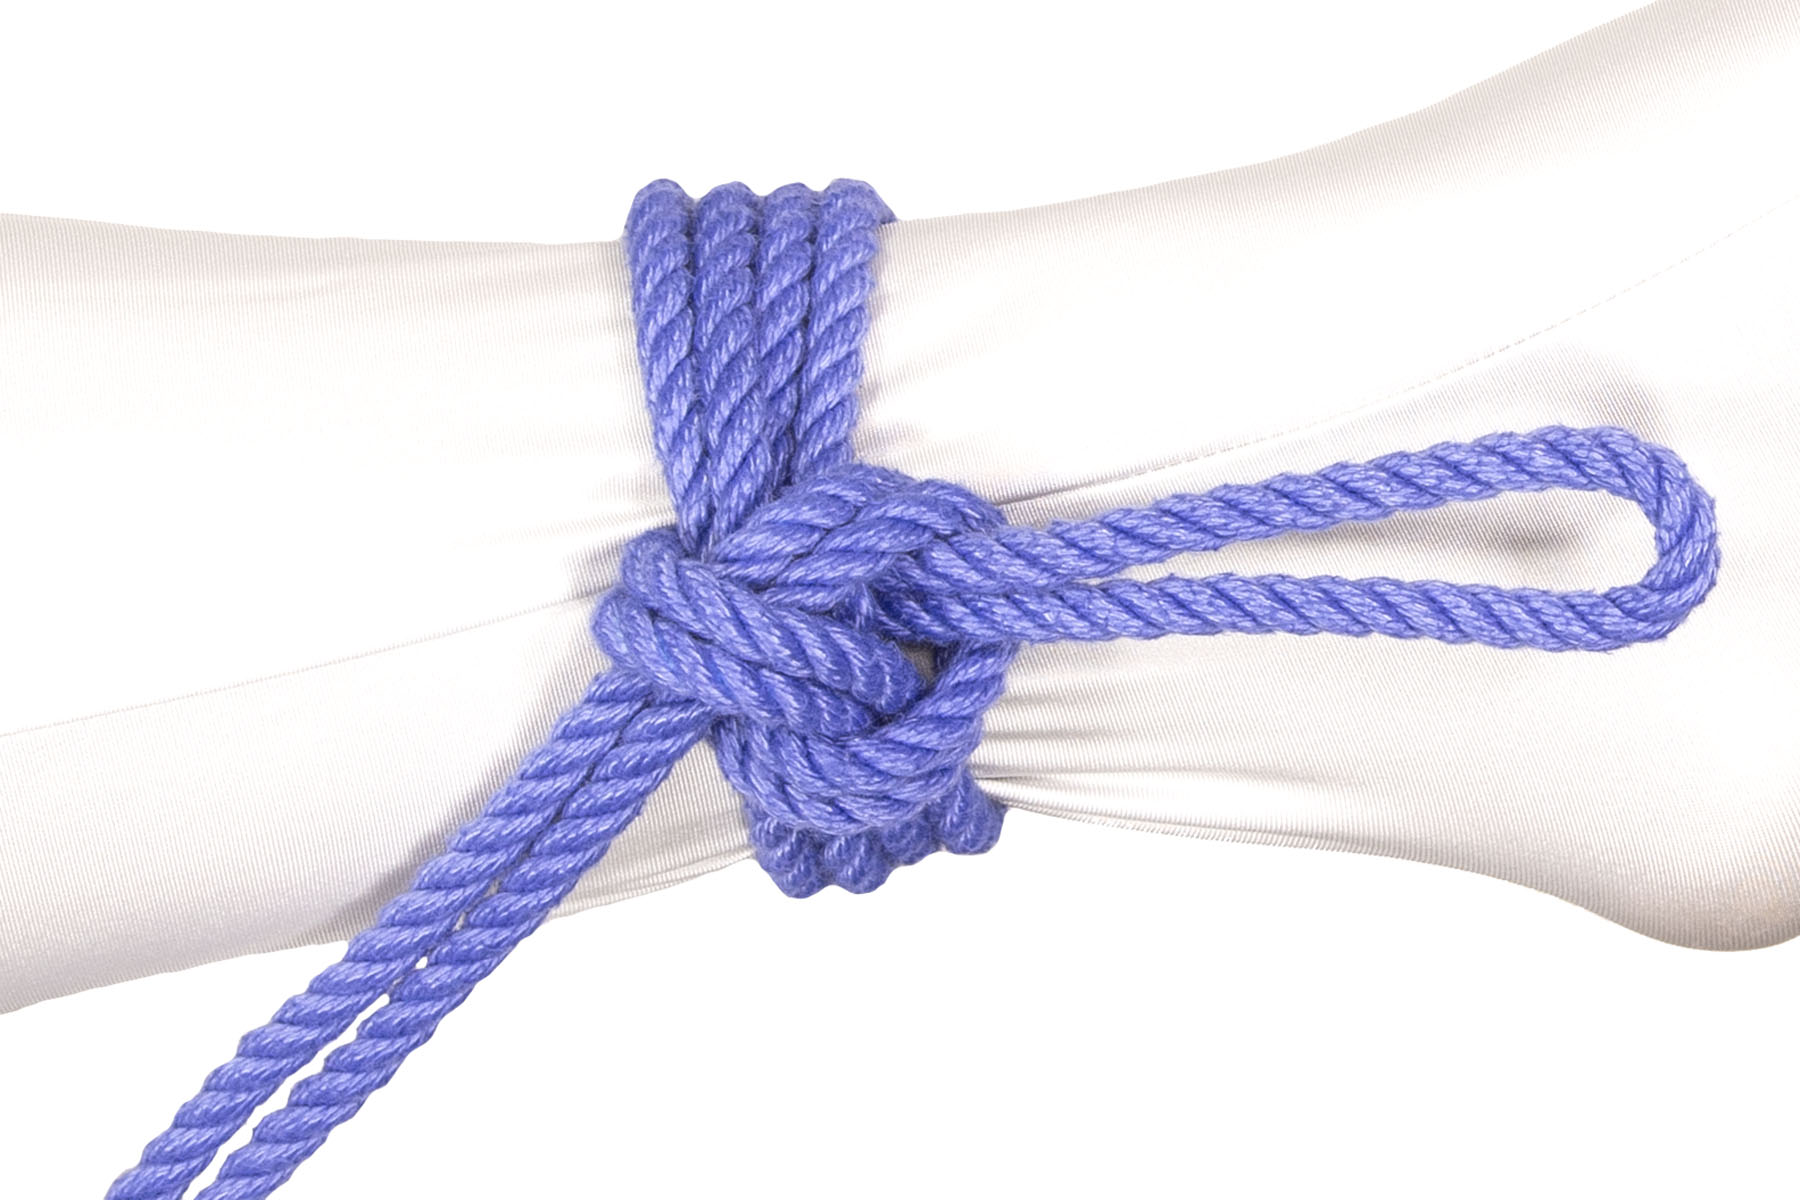 A Somerville bowline has been tied in doubled blue rope around the ankle of a person wearing a white bodysuit. The standing part of the rope enters from the lower left and joins the knot right above the ankle bone. Two double wraps circle the ankle and a three inch bight extends toward the heel.